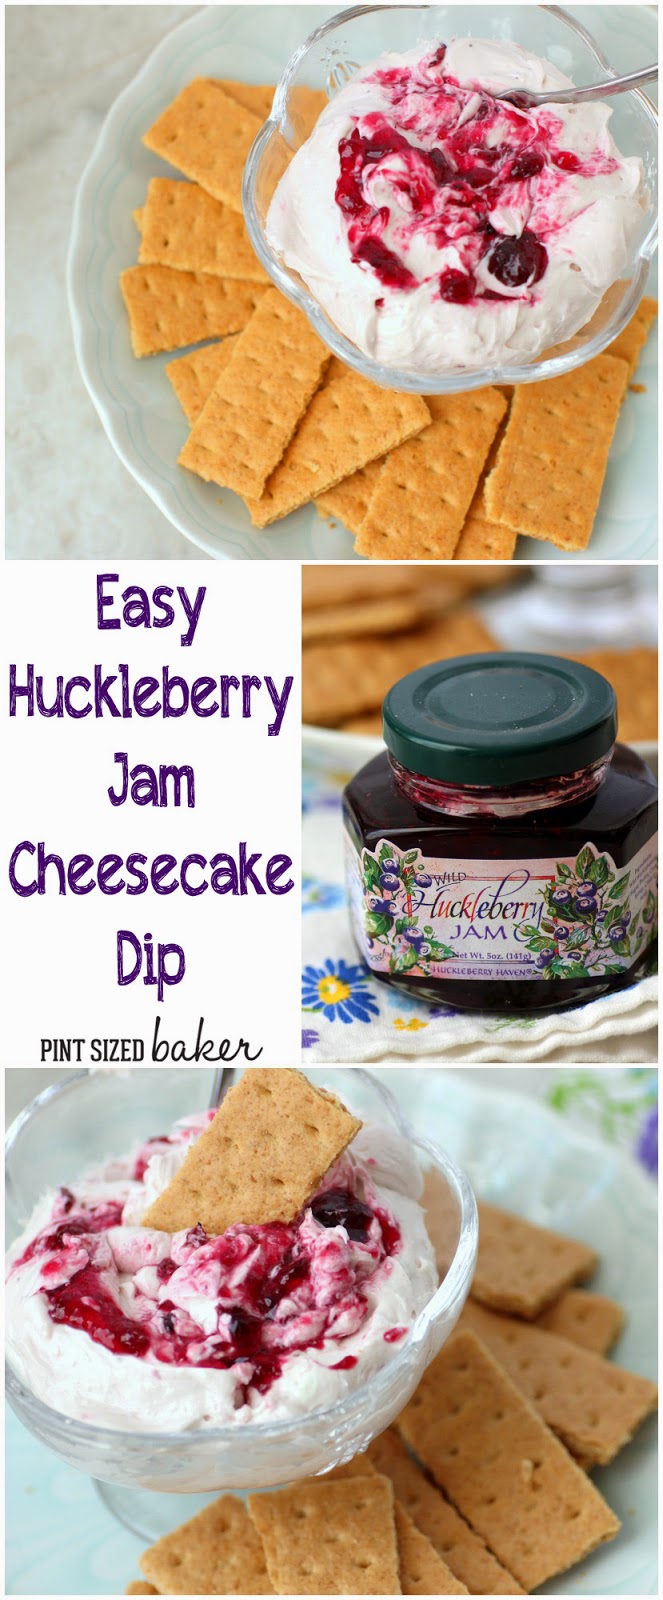 The wonderful flavor of Montana's huckleberries comes to your kitchen in this Huckleberry Jam Cheesecake Dip. It's a tasty party treat!